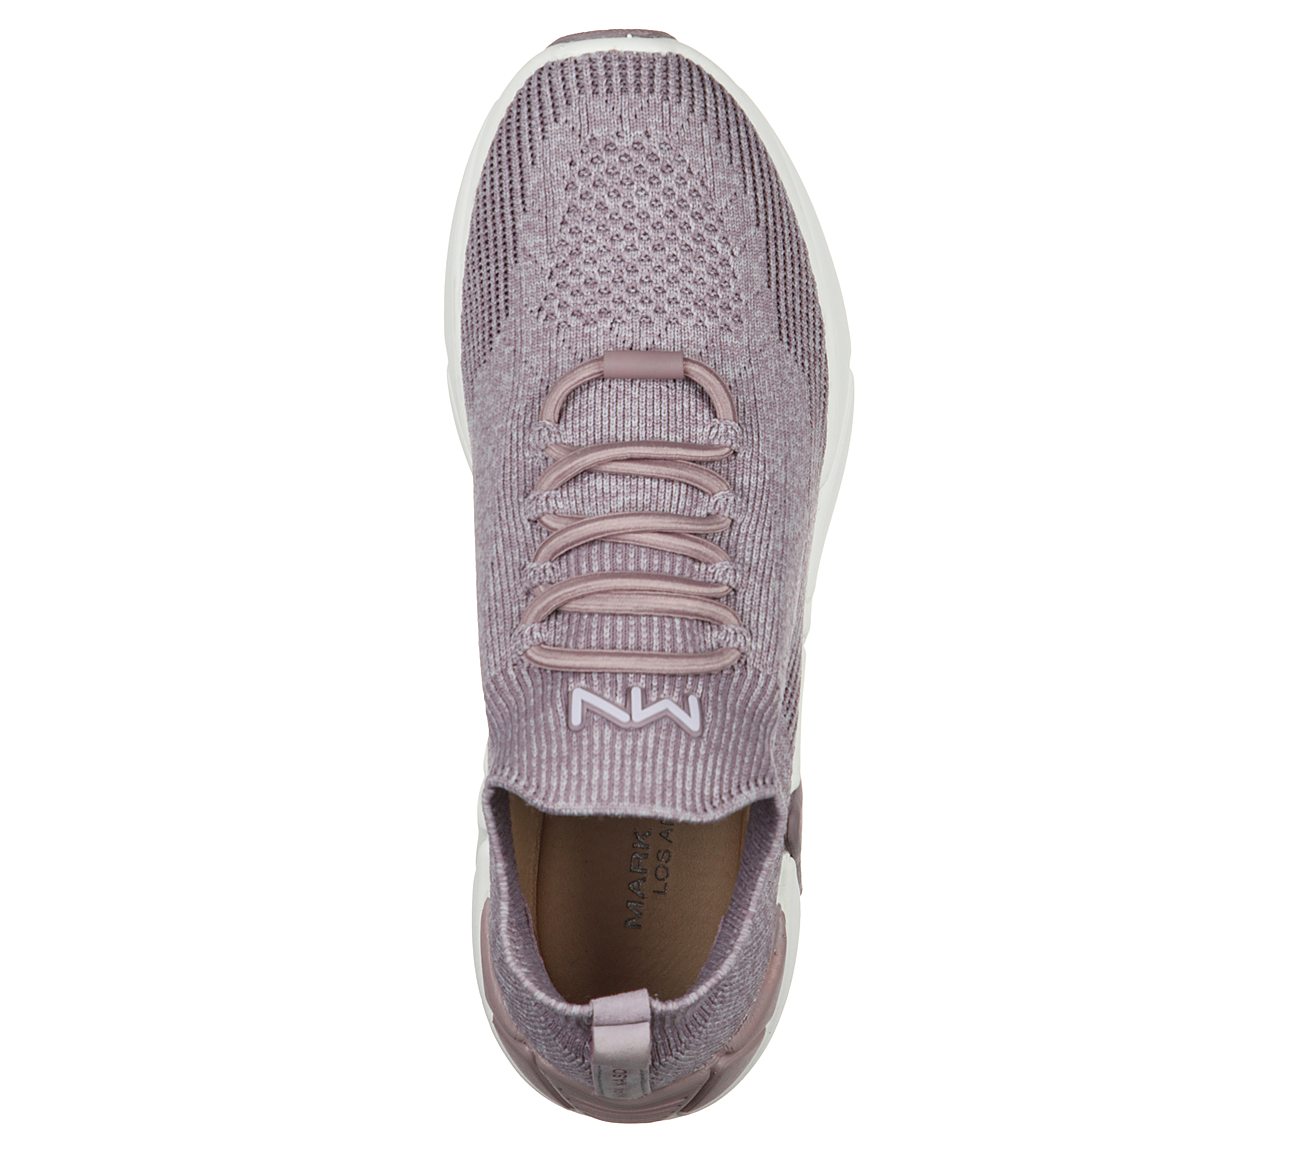 A-LINE - POINTE, LILAC Footwear Top View